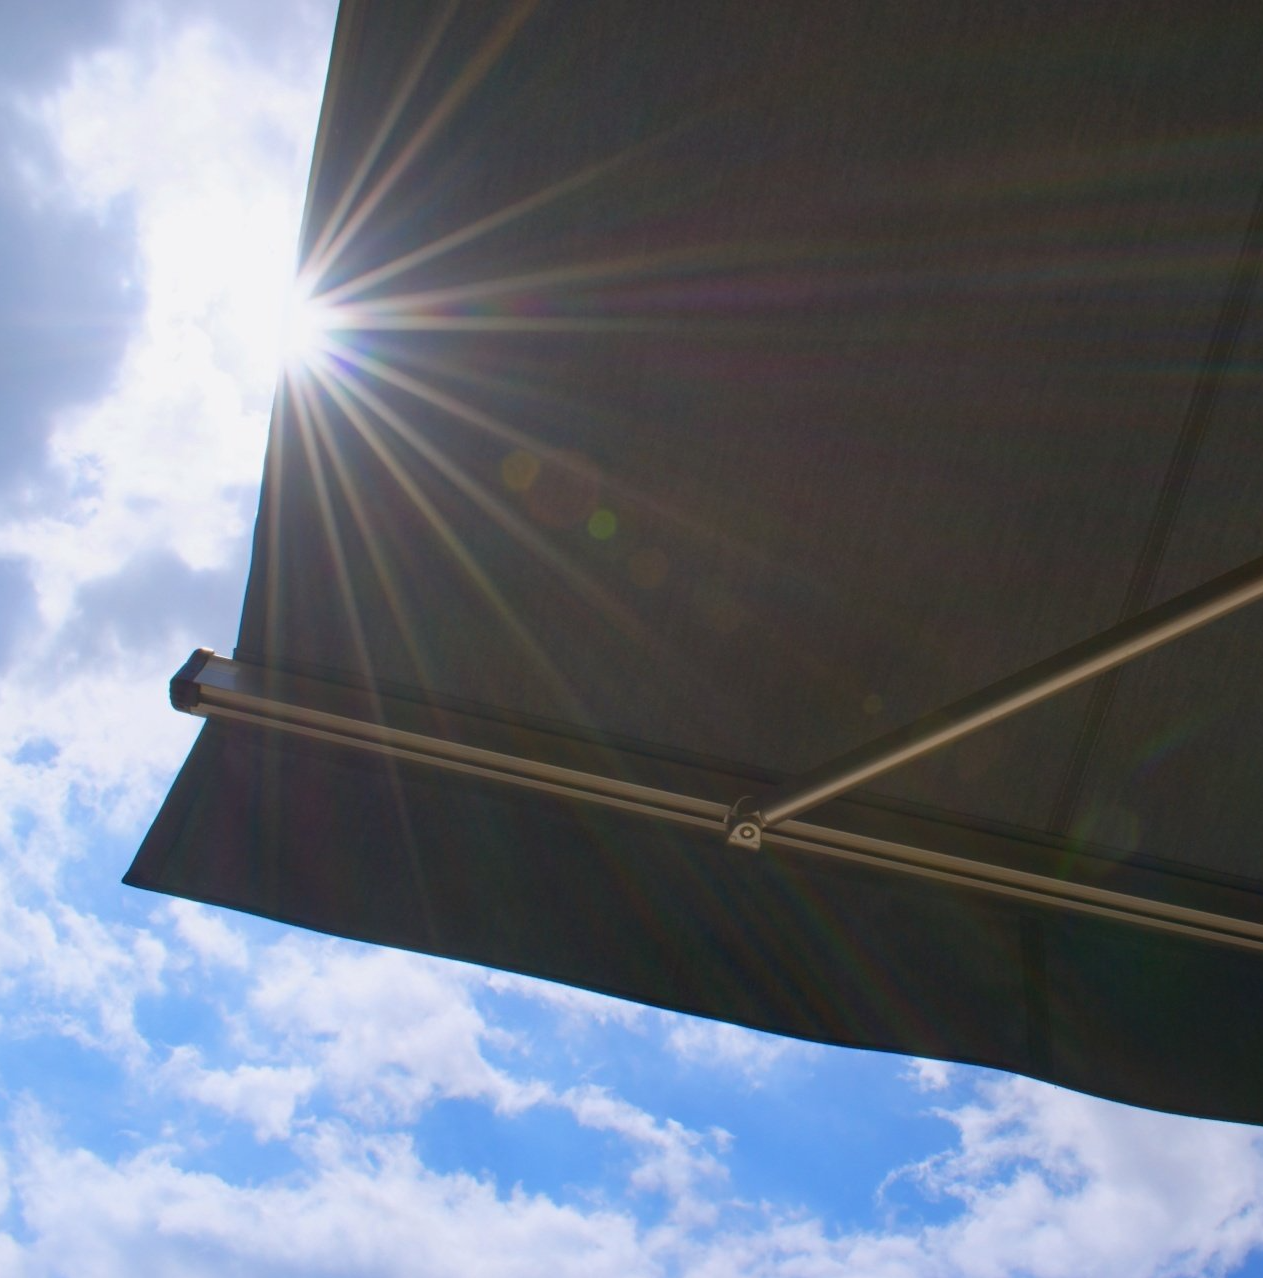 Upward view of black outdoor awning, with sun shining brightly in slightly cloudy blue sky.